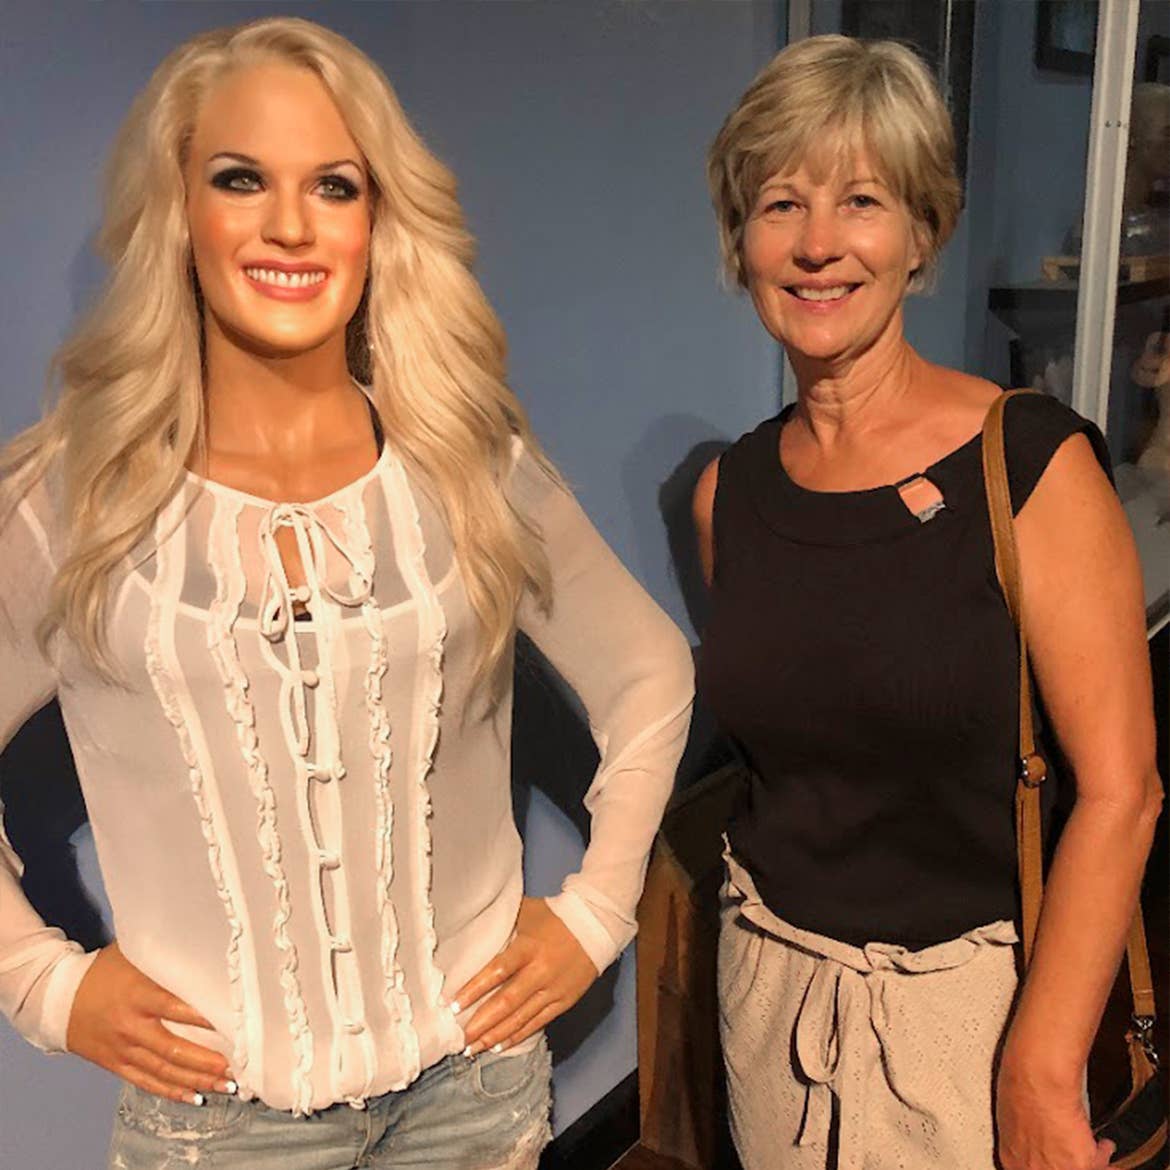 A woman in a black top stands to the right of a wax figure of singer, Carrie Underwood.